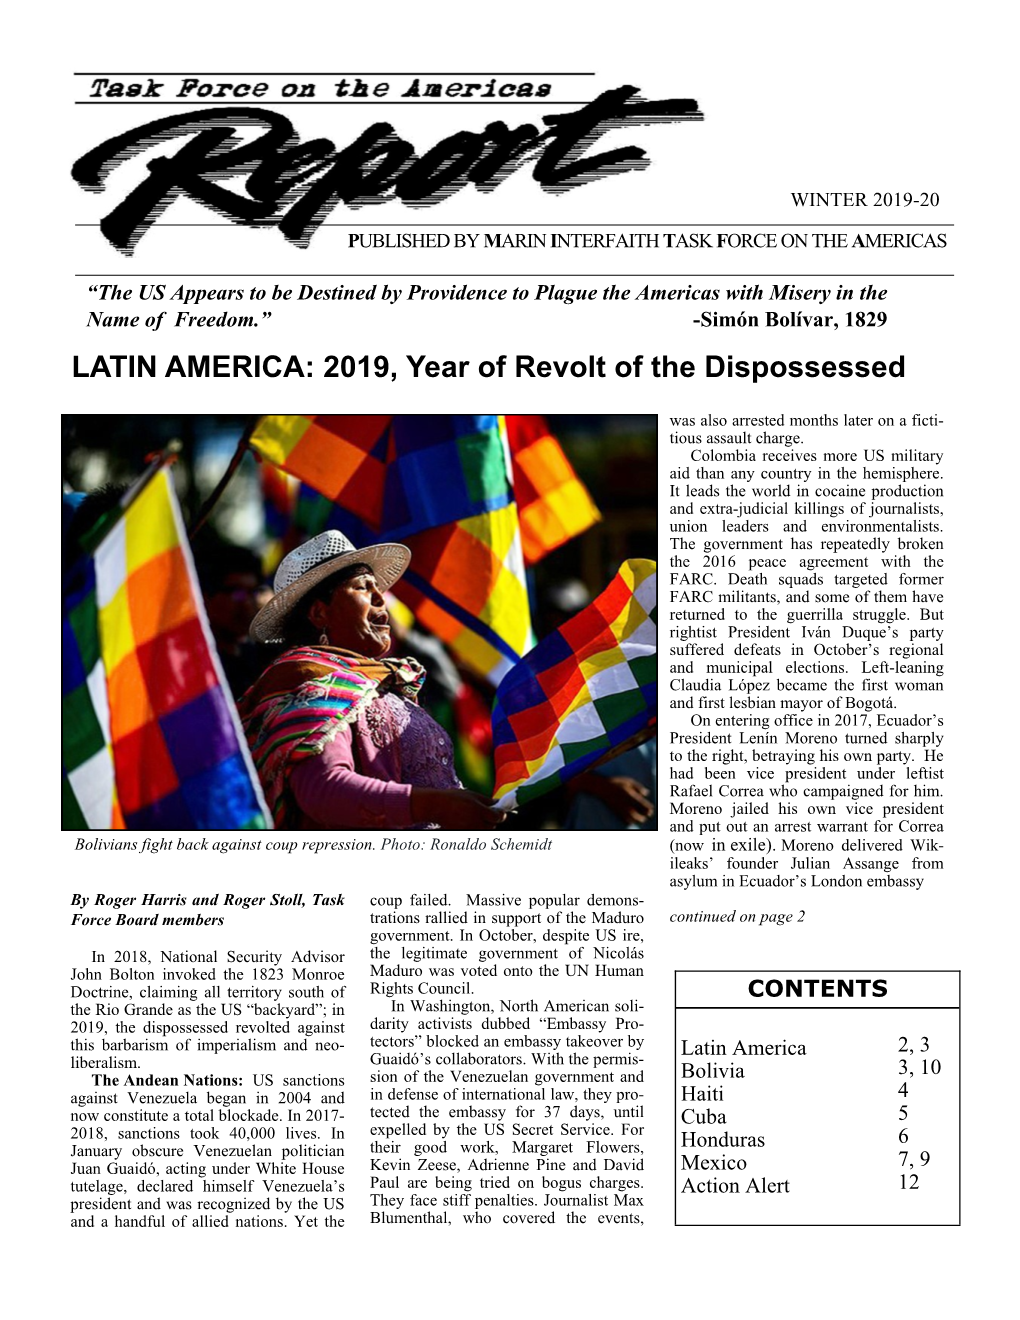 Winter 2019-20 Published by Marin Interfaith Task Force on the Americas